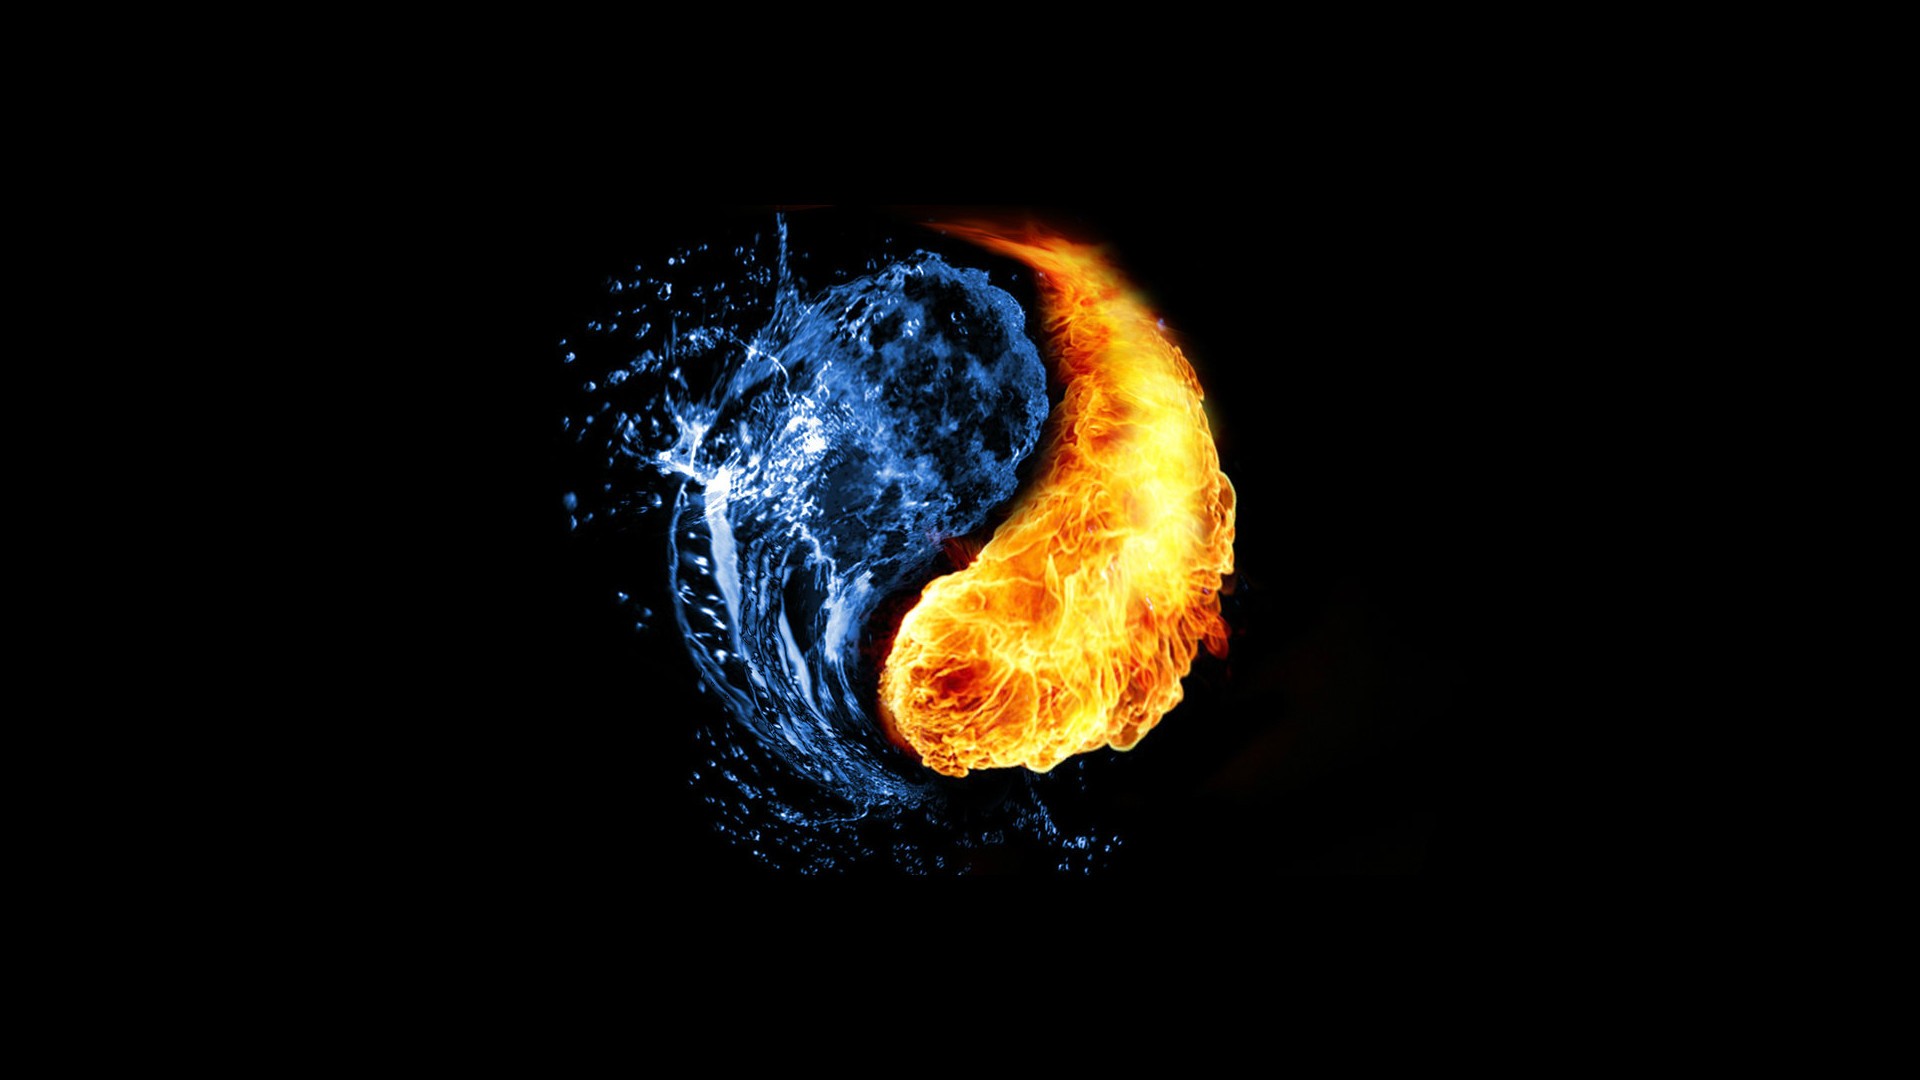 Abstract Flames Fire And Water